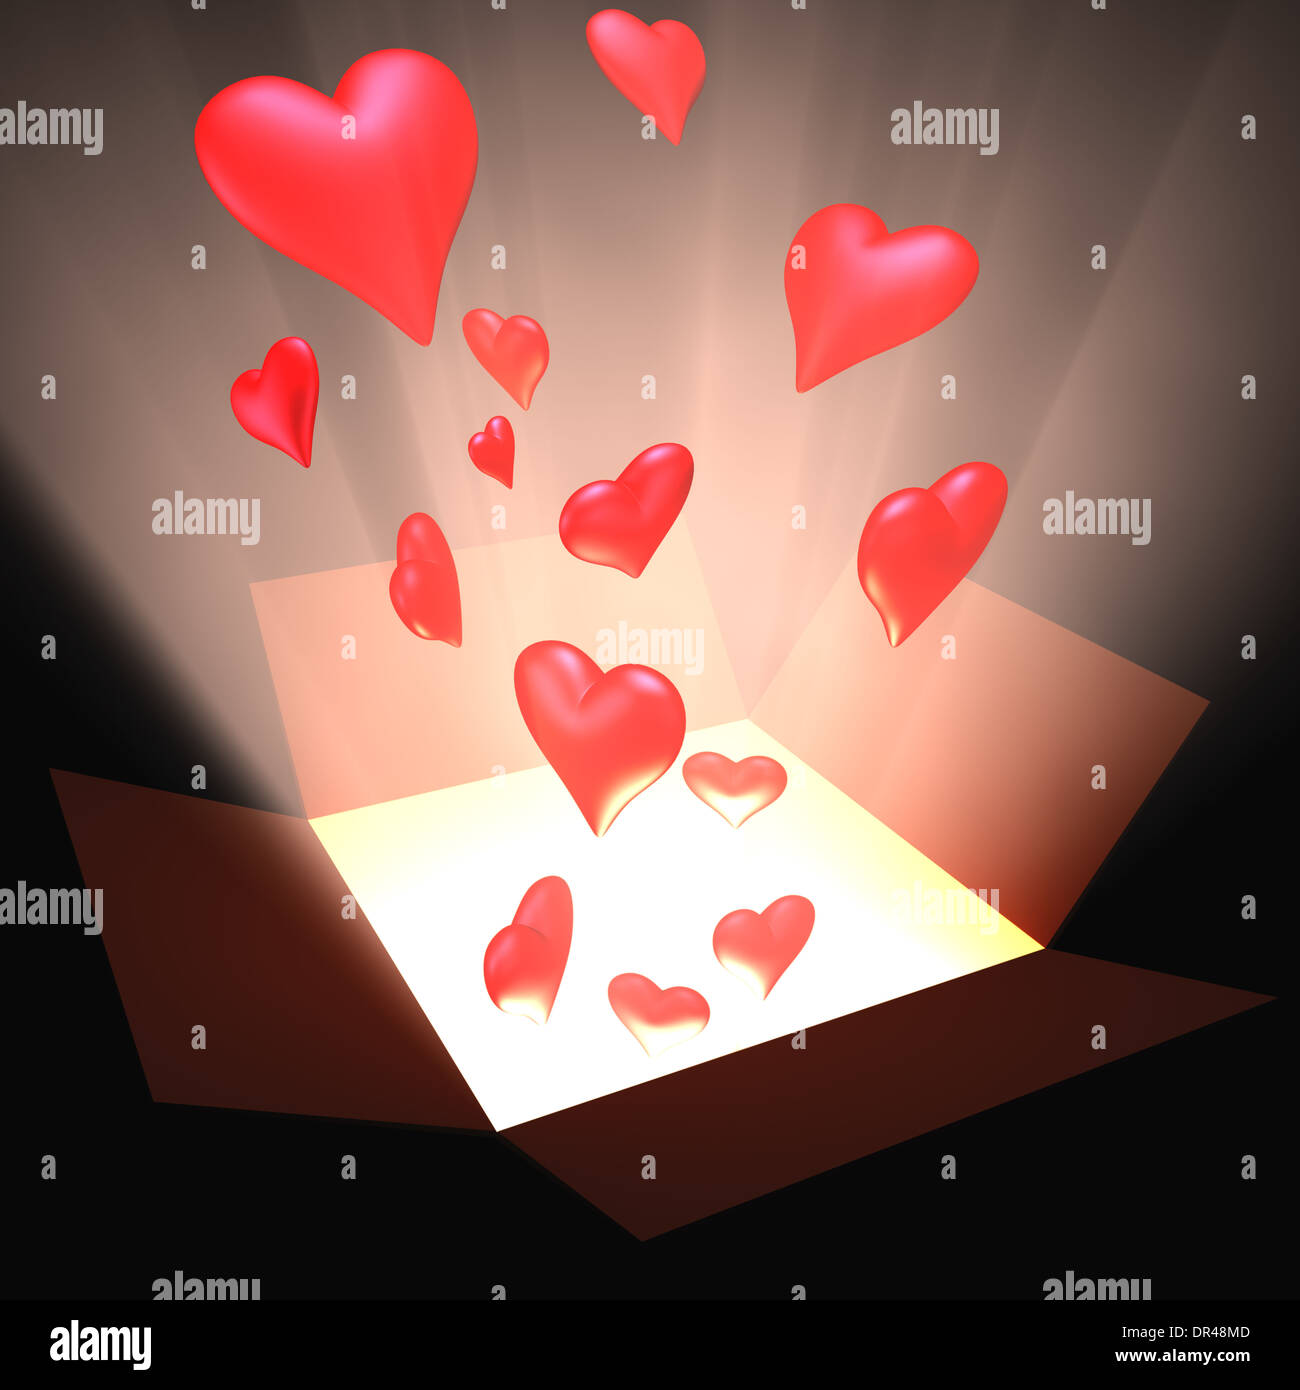 Open box with heart and light inside. Concept of love. Stock Photo